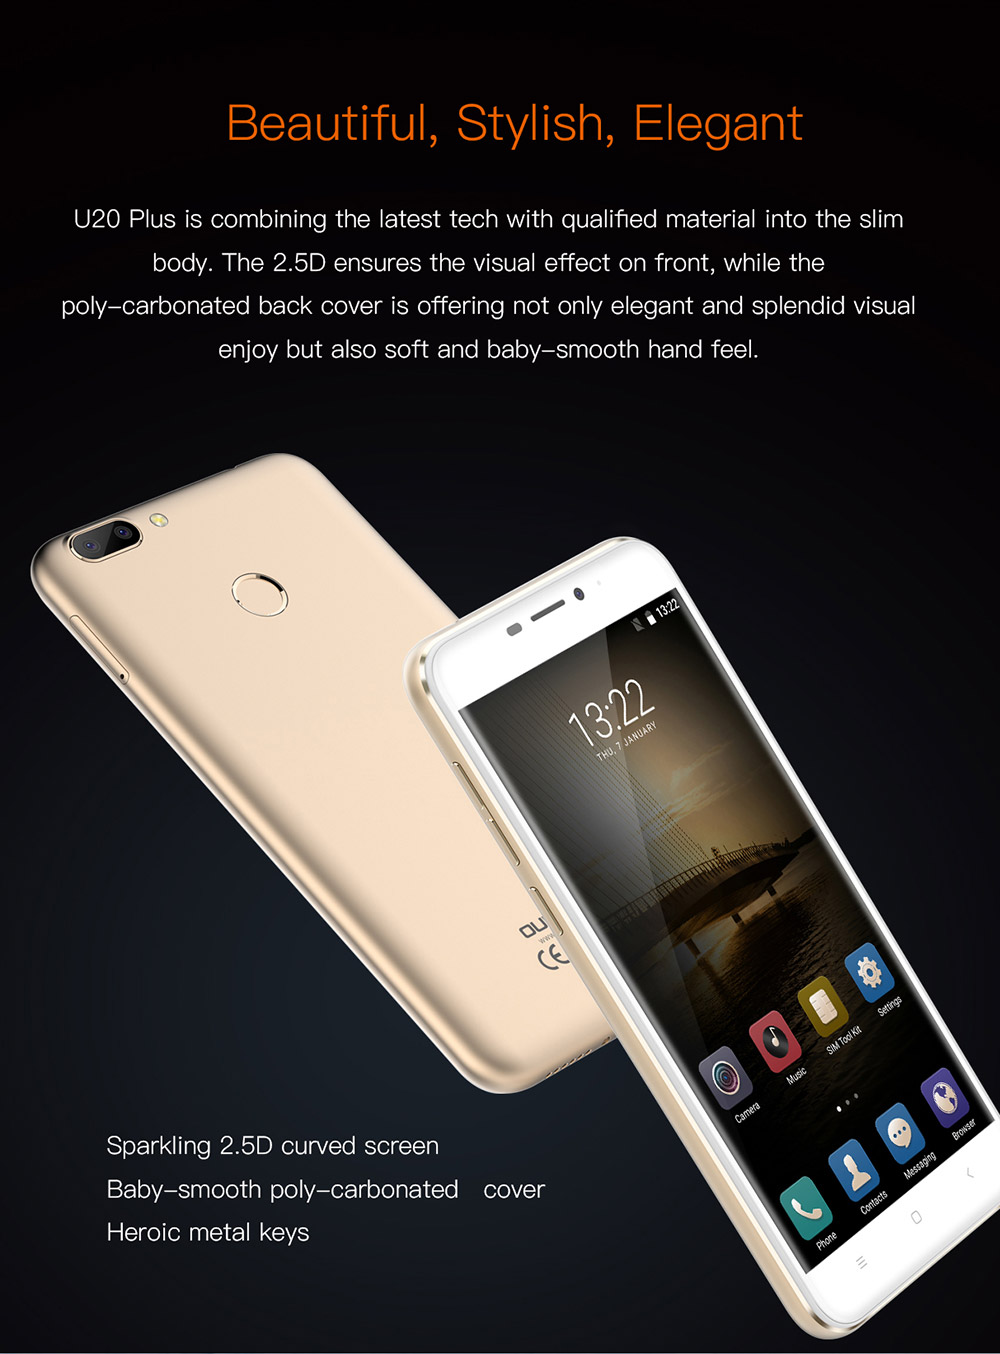 [HK Stock]Oukitel U20 Plus 5.5inch FHD Android 6.0 4G LTE Smartphone MT6737T Quad Core 1.5GHz 2GB RAM 16GB ROM Dual Rear Cameras 13.0MP+0.3MP TOUCH ID - GRAY